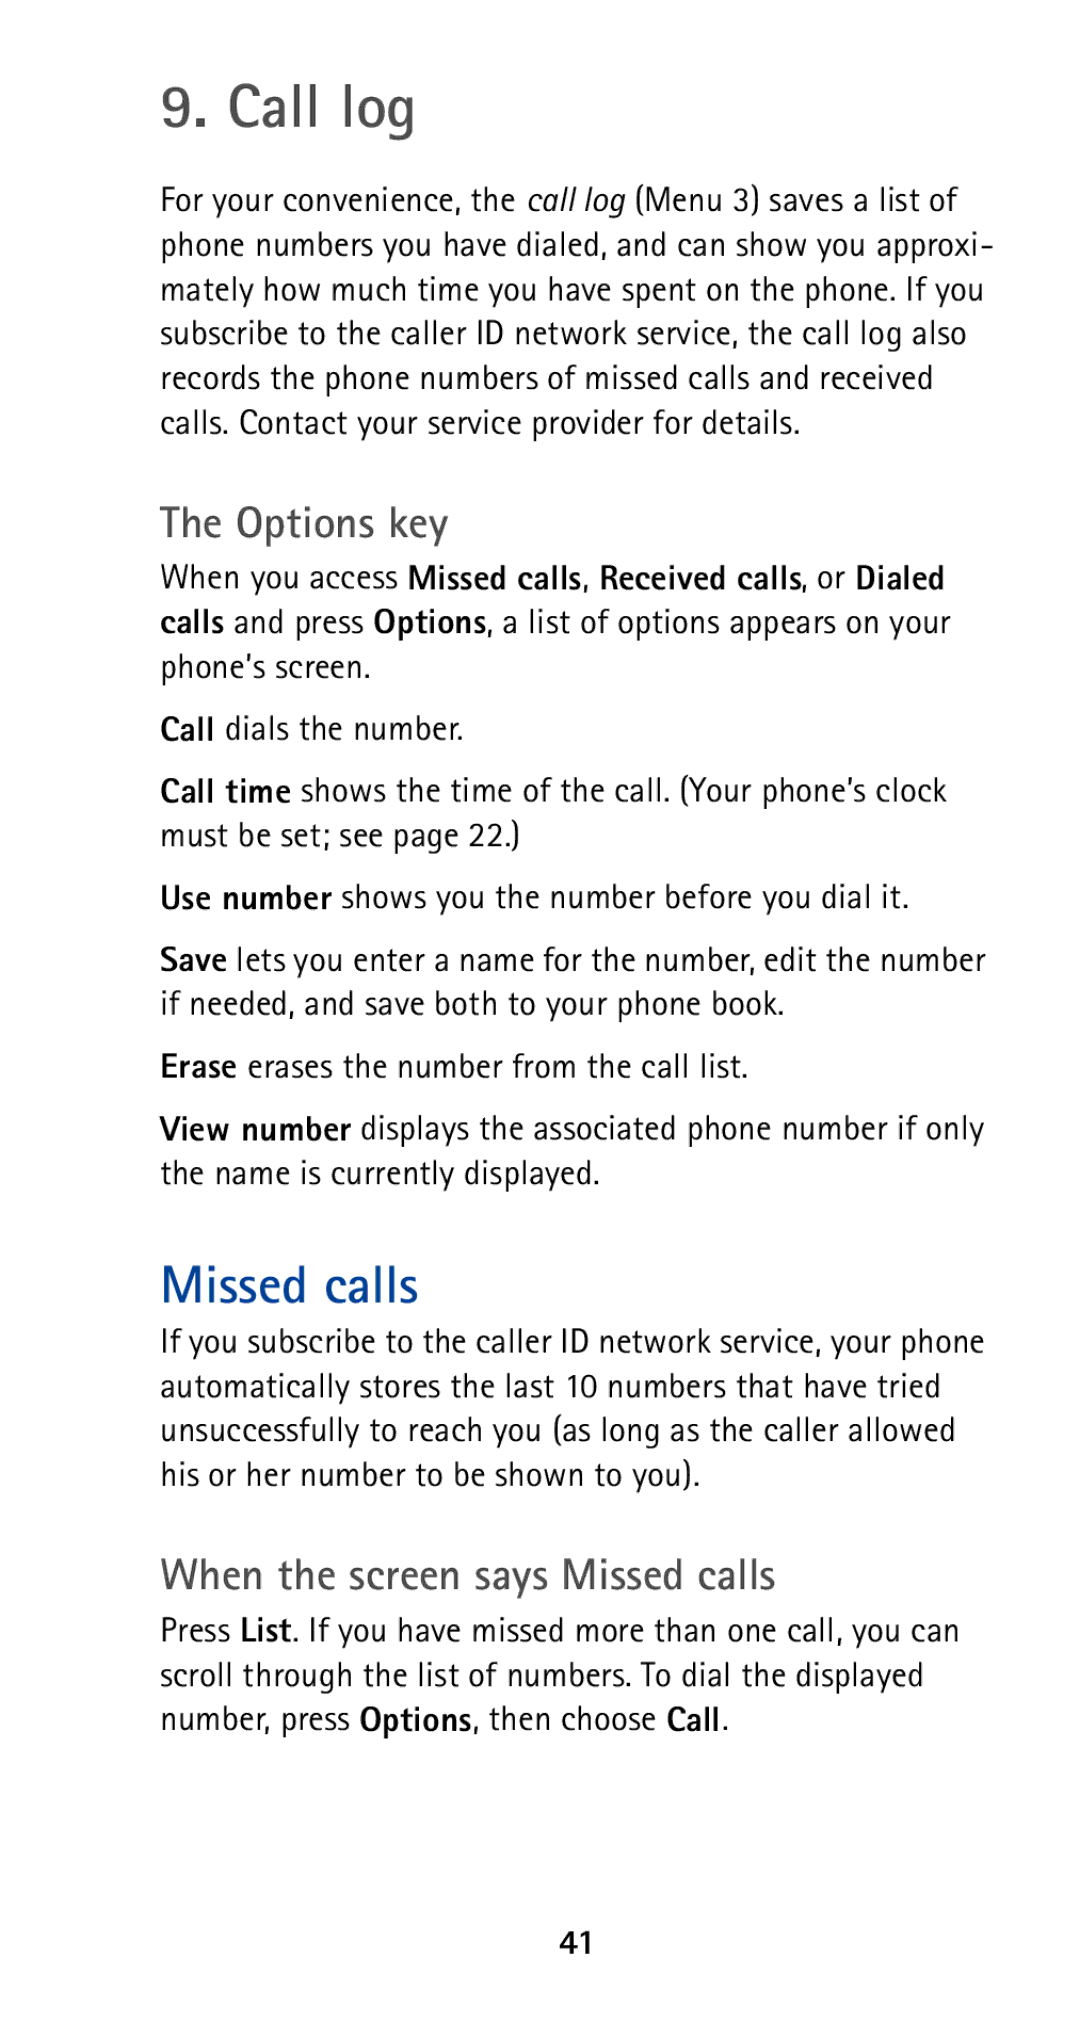 Nokia 5185i manual Call log, Options key, When the screen says Missed calls 